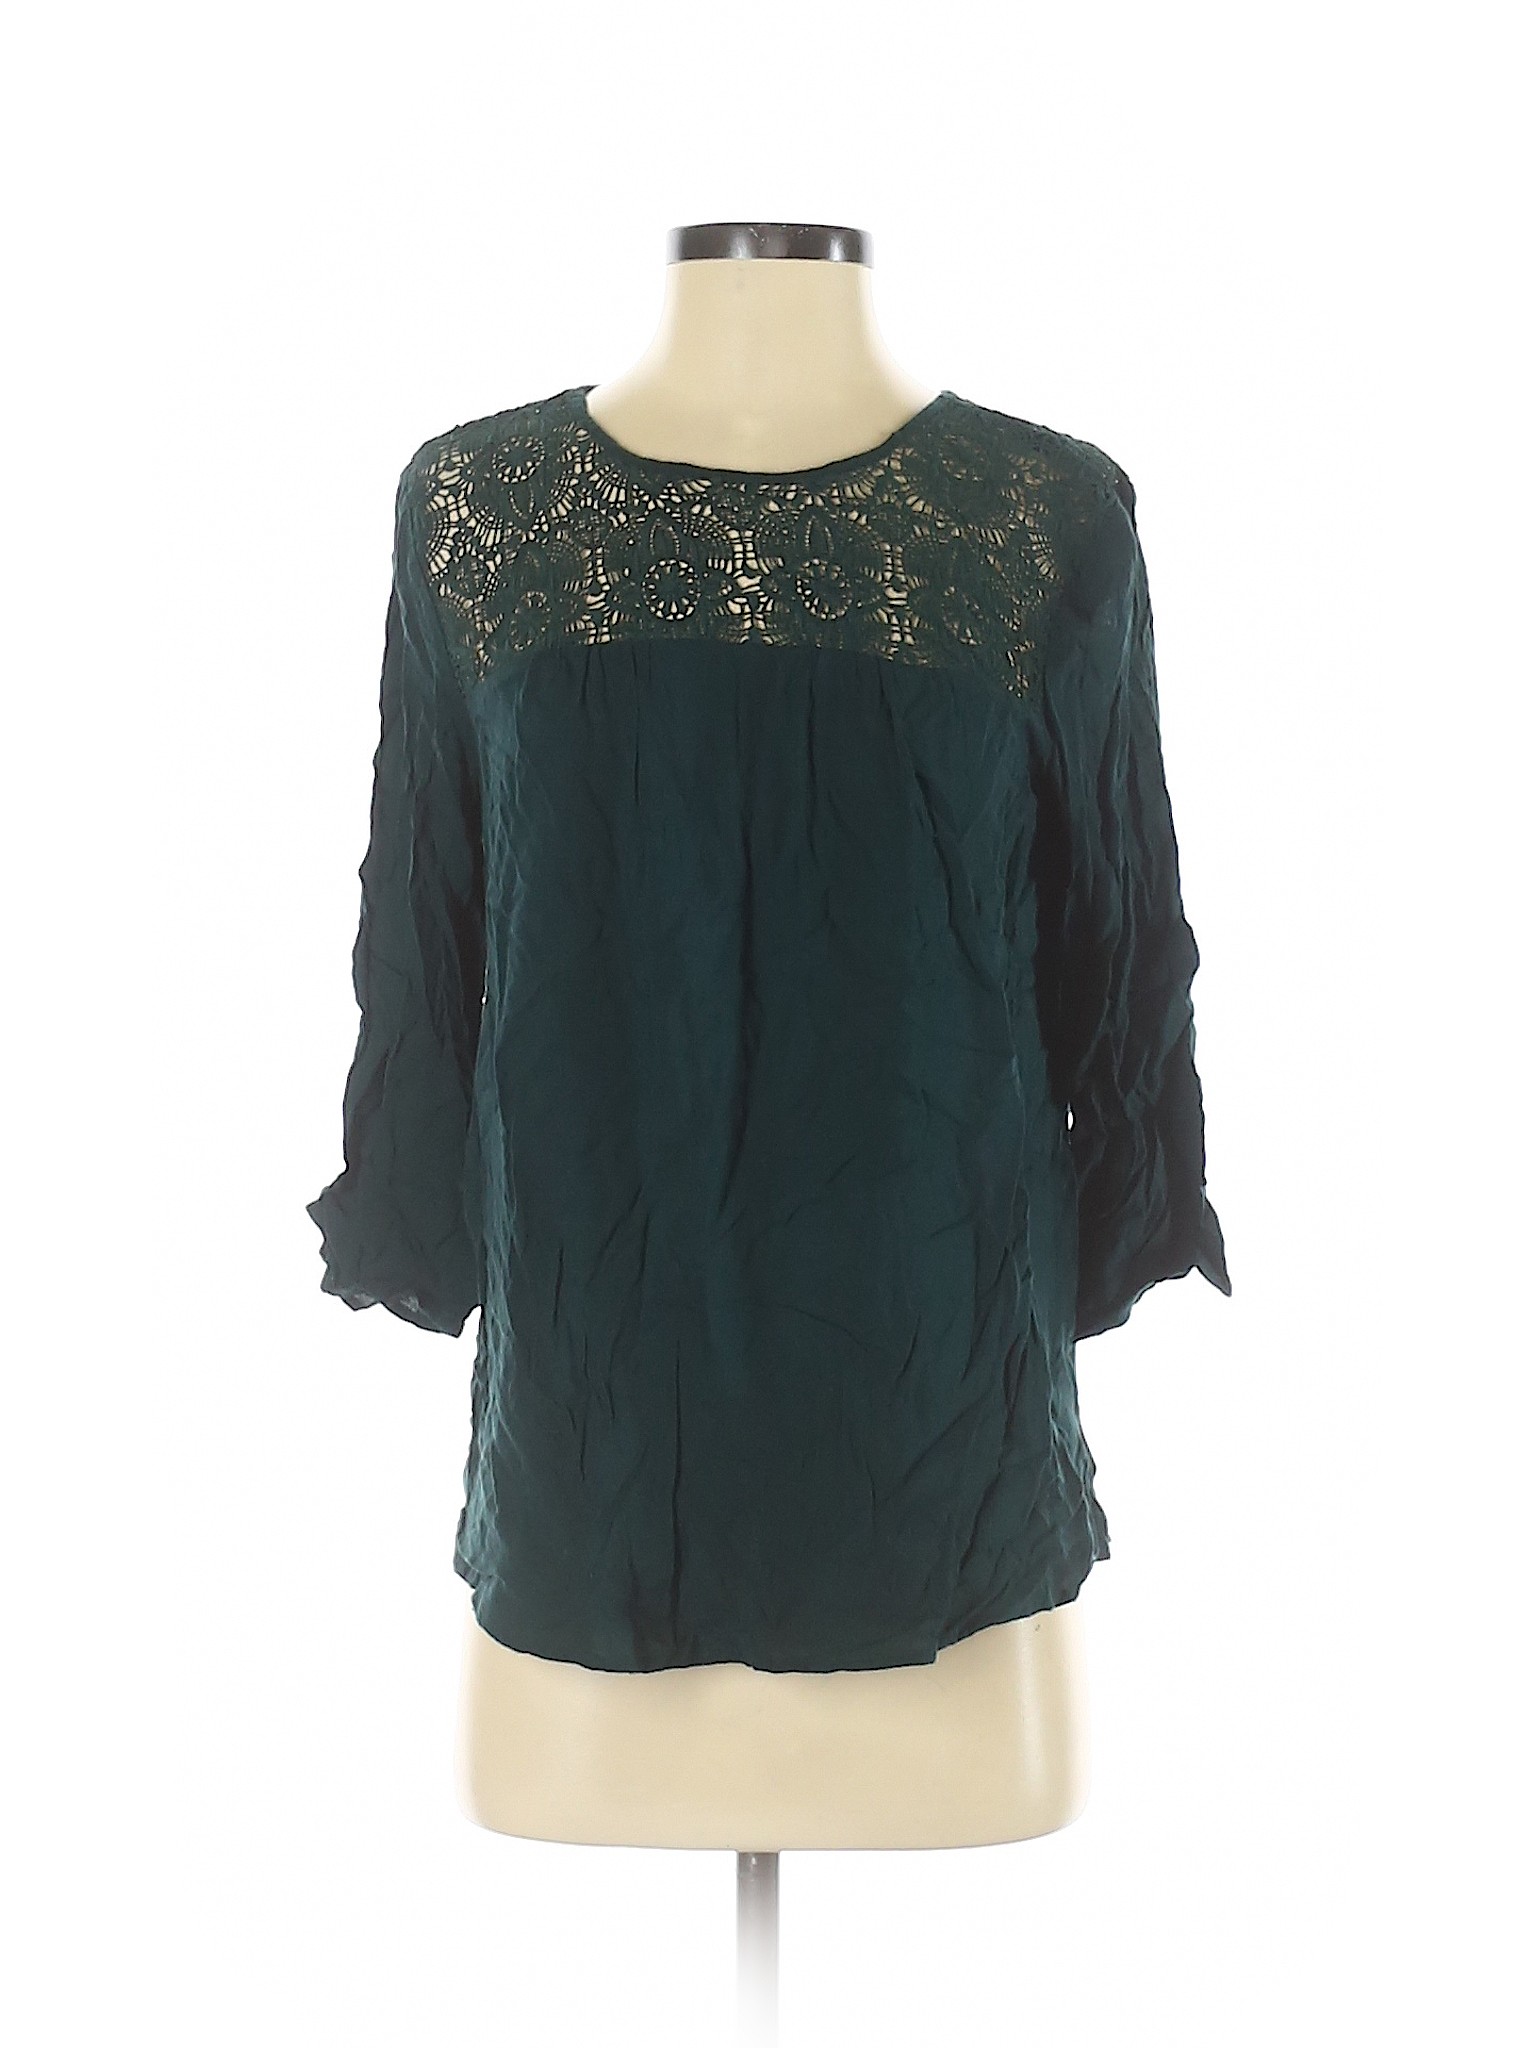 Old Navy 100% Rayon Solid Green 3/4 Sleeve Blouse Size S - 80% off ...